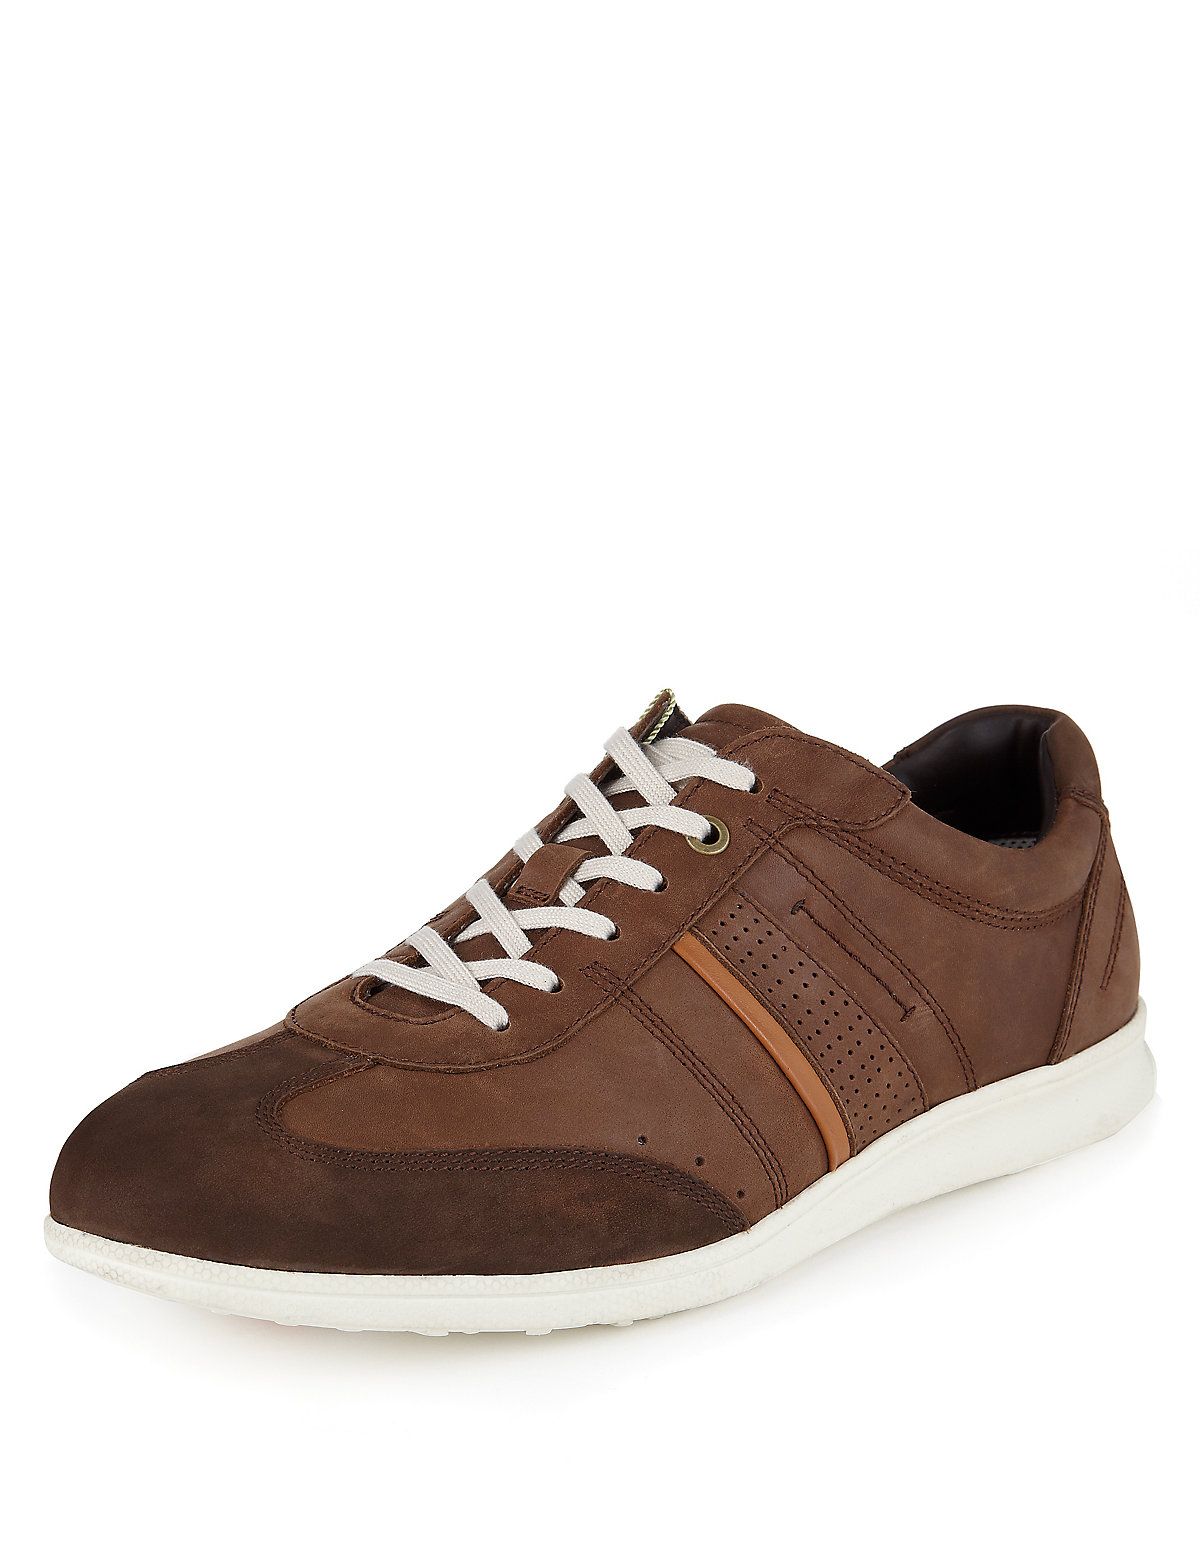 Blue Harbour Suede Stitched Trainer | Feedworks